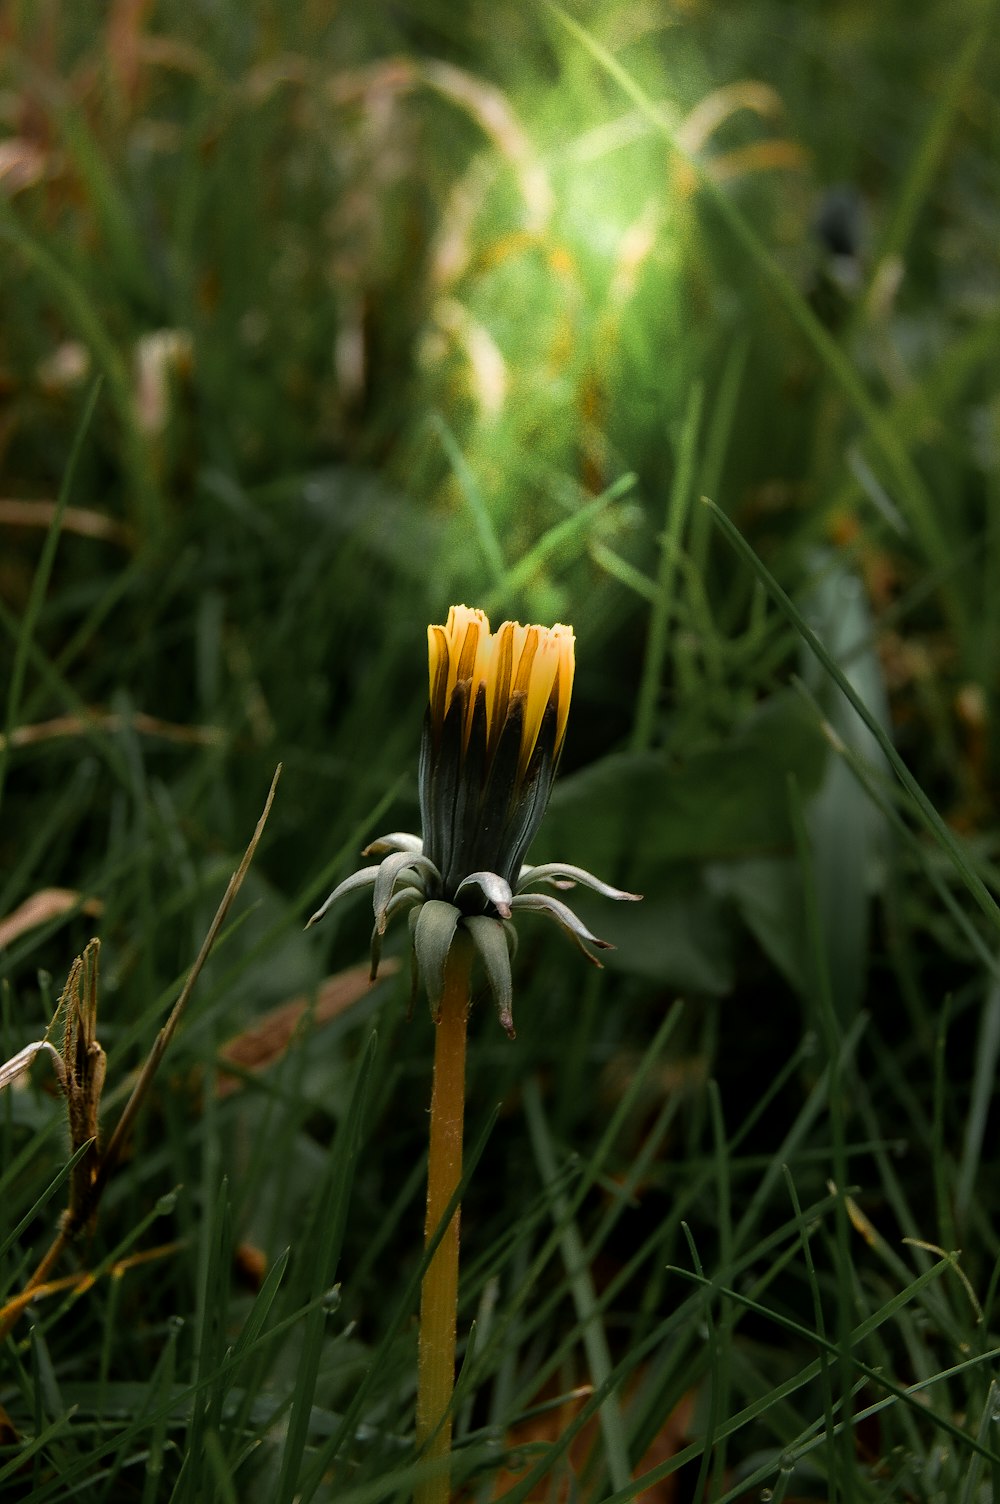 a yellow and black flower in a grassy field